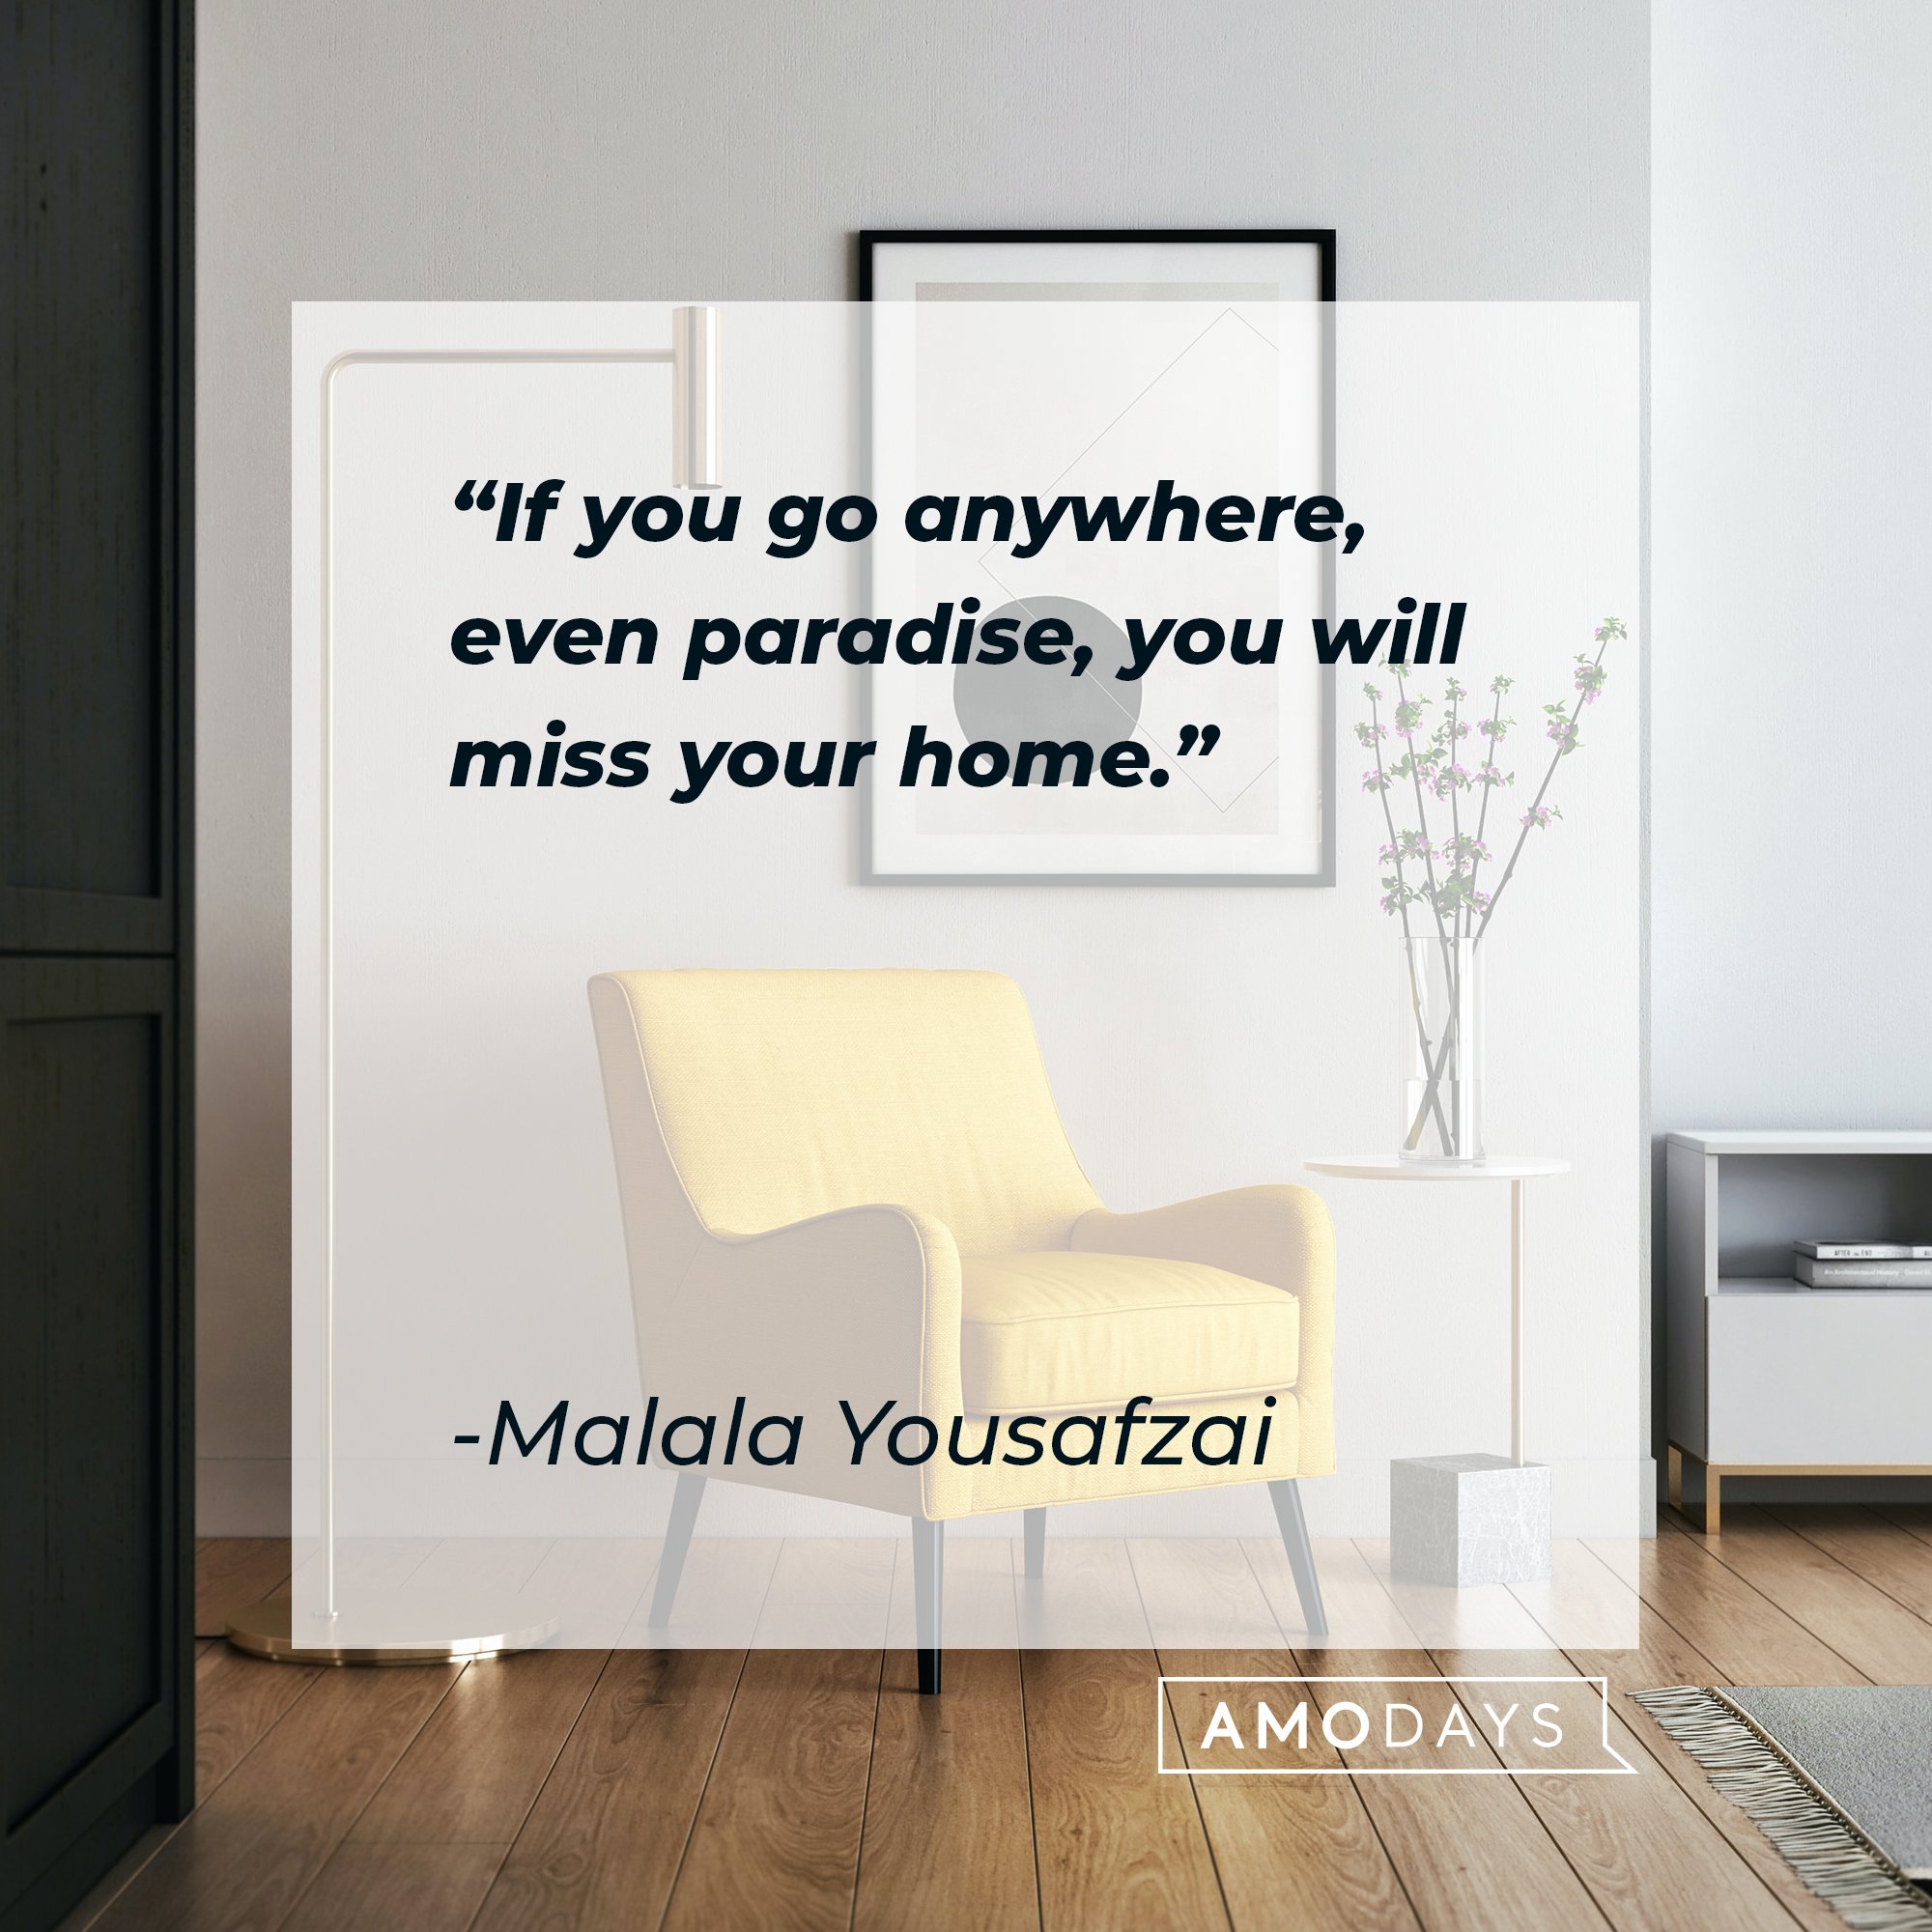 Malala Yousafzai's quote: "If you go anywhere, even paradise, you will miss your home." | Image: AmoDays